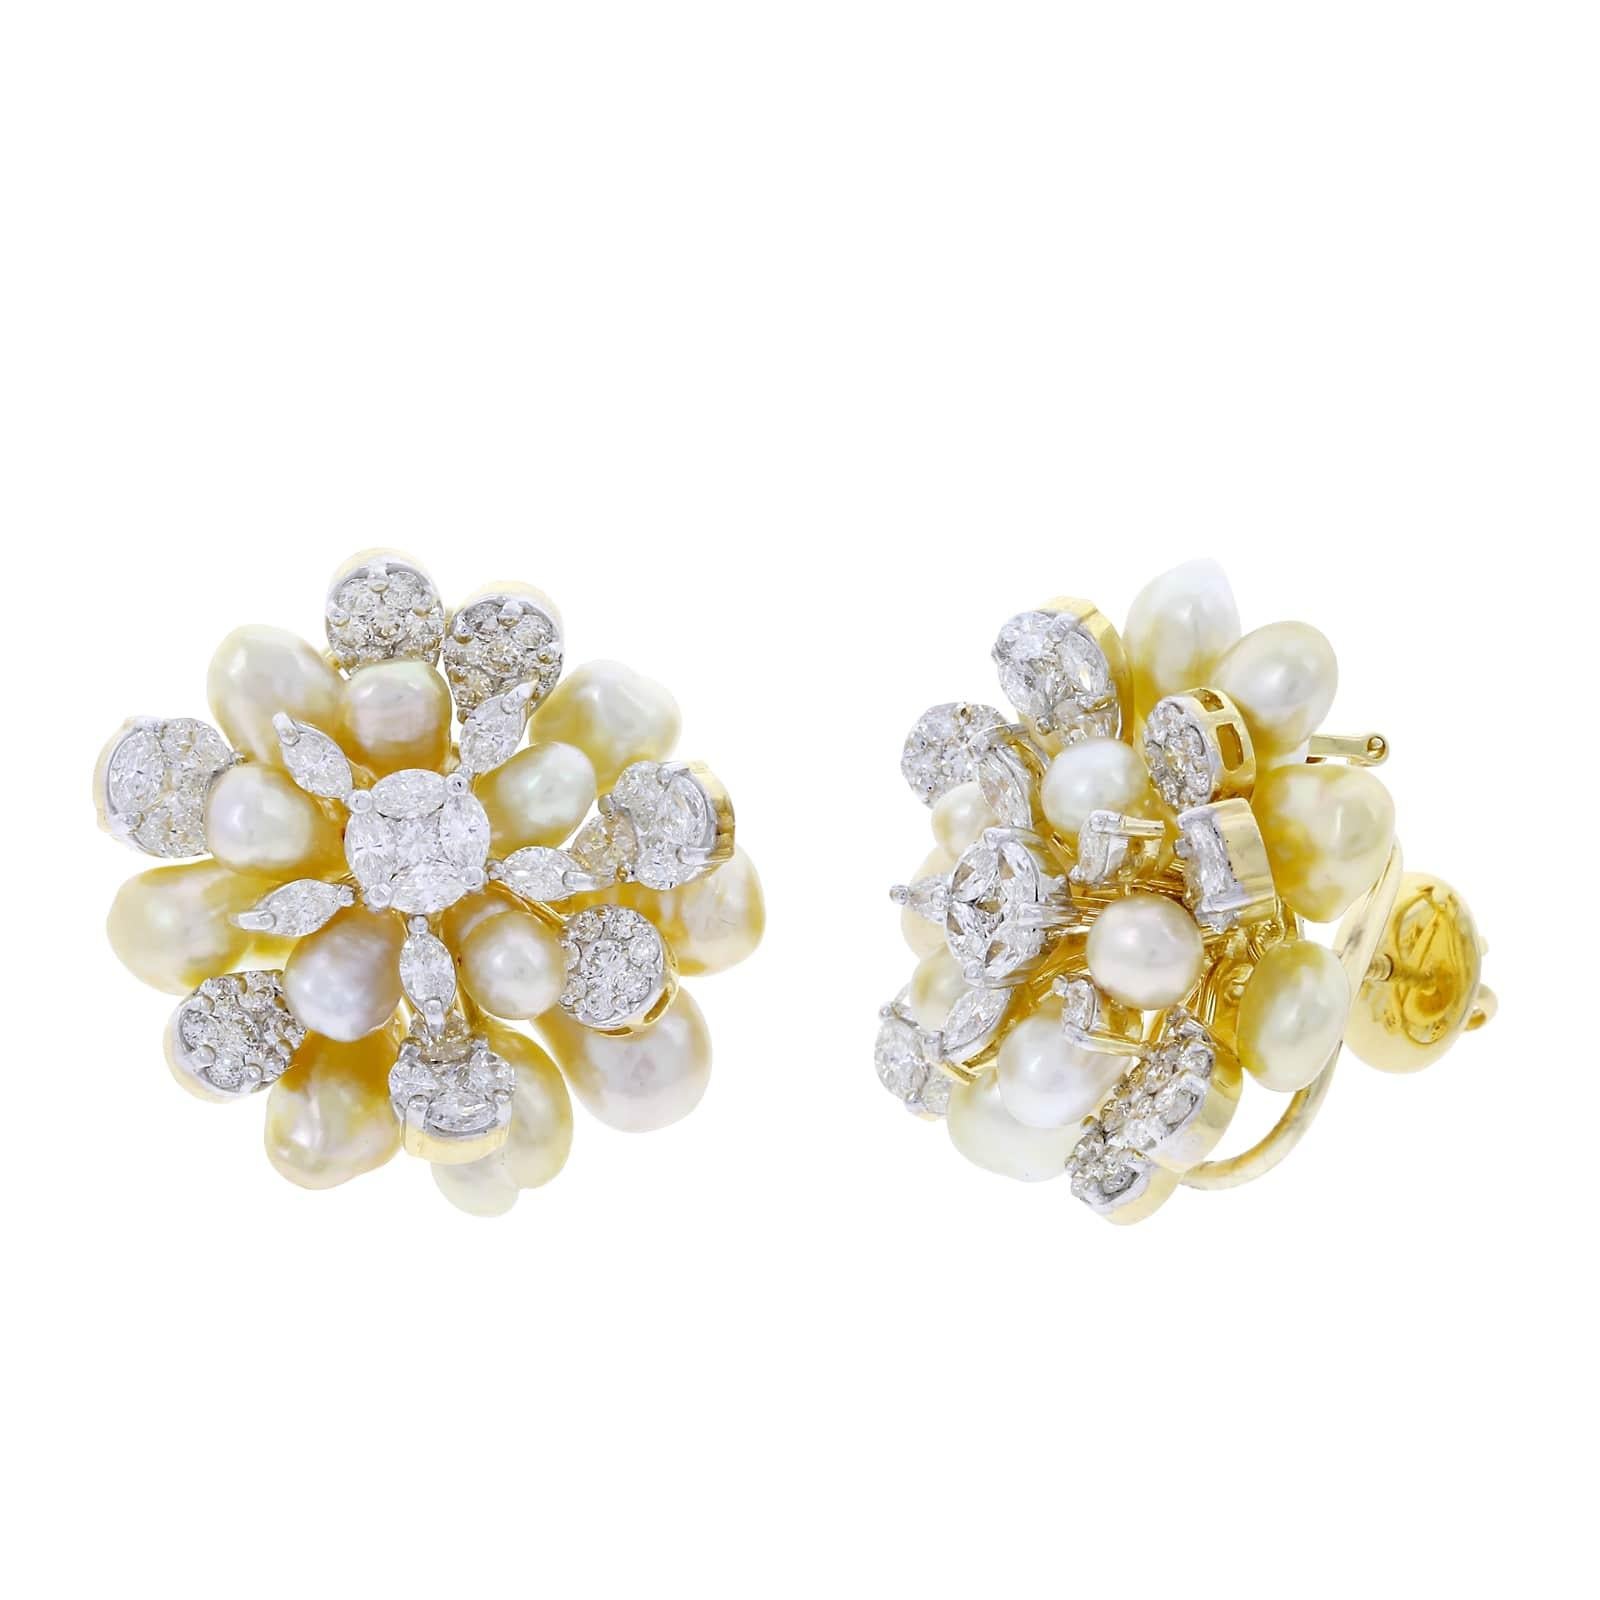 A stunning and elegant pair of cluster earrings accented with pearls and diamonds. Total Diamond Weight: Pear (0.85 cts). Princess (0.85 cts.), Marquise (2.71 cts.) H Color, VS Clarity. The pearls weigh approzimately 38 carats. 18K Yellow Gold. Part